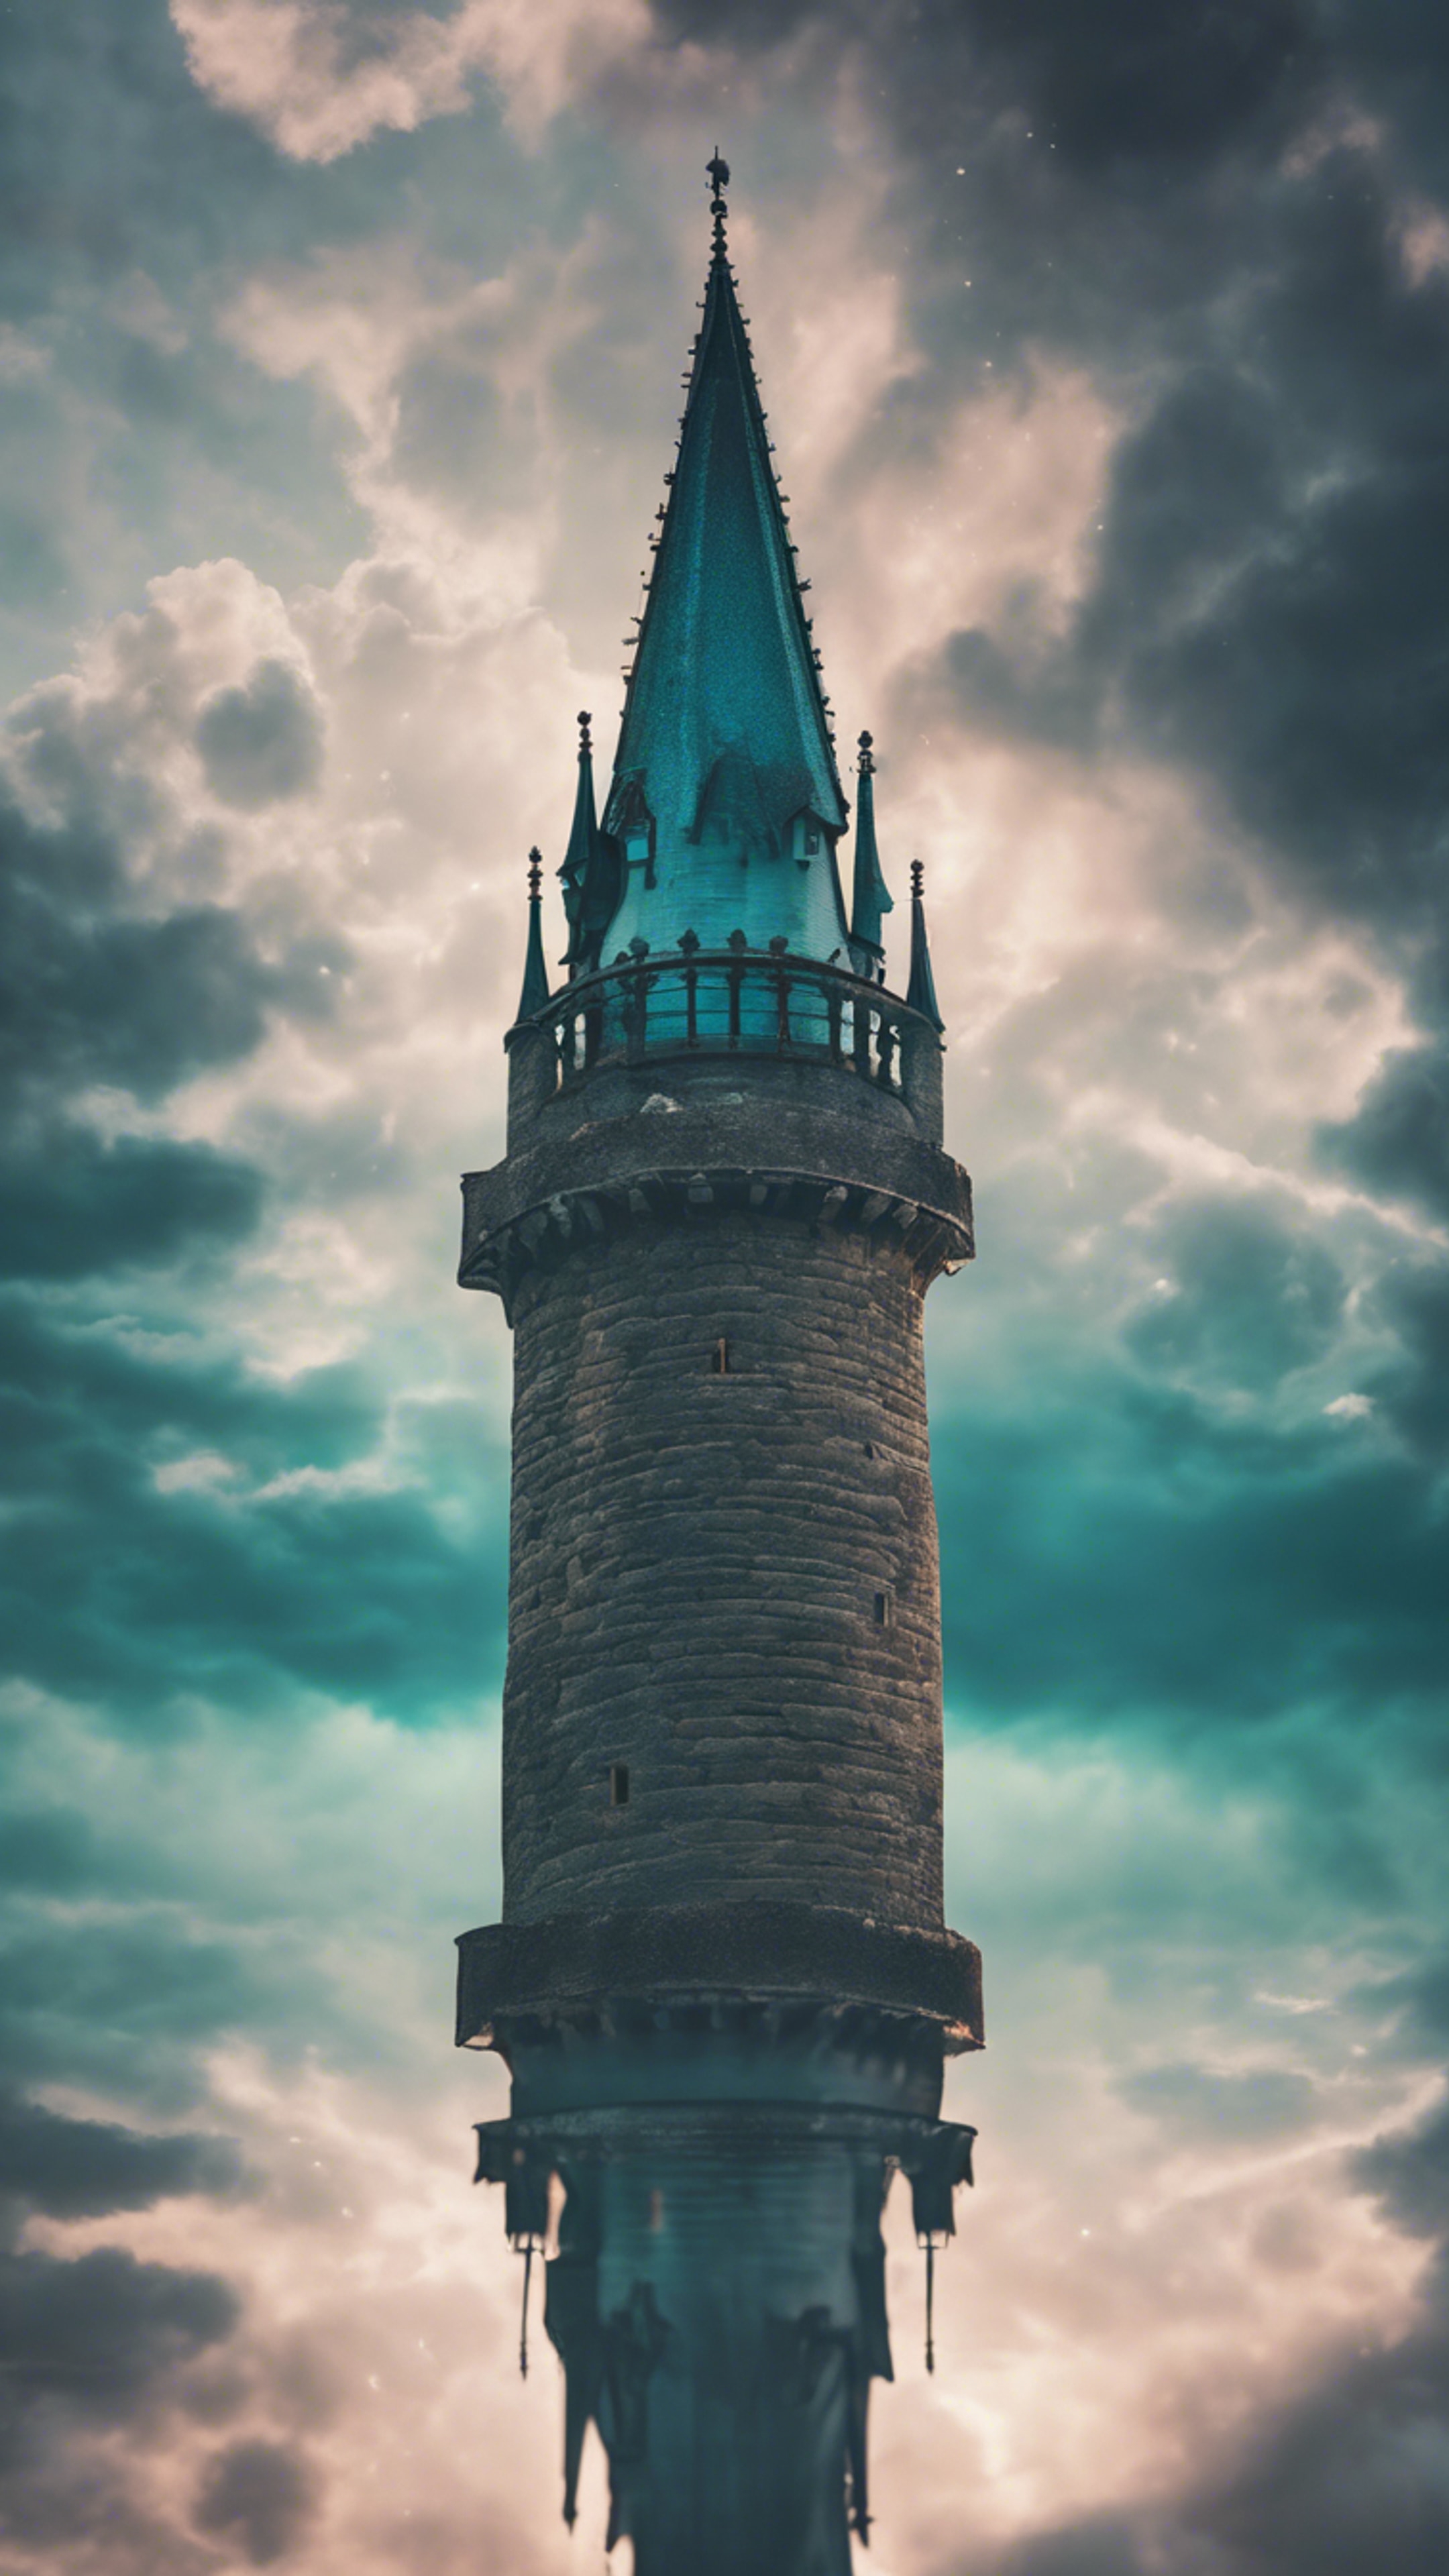 A Gothic castle tower reaching into the clouds, lit from within by mystery teal lights. 牆紙[95b6d3de171842619bd4]